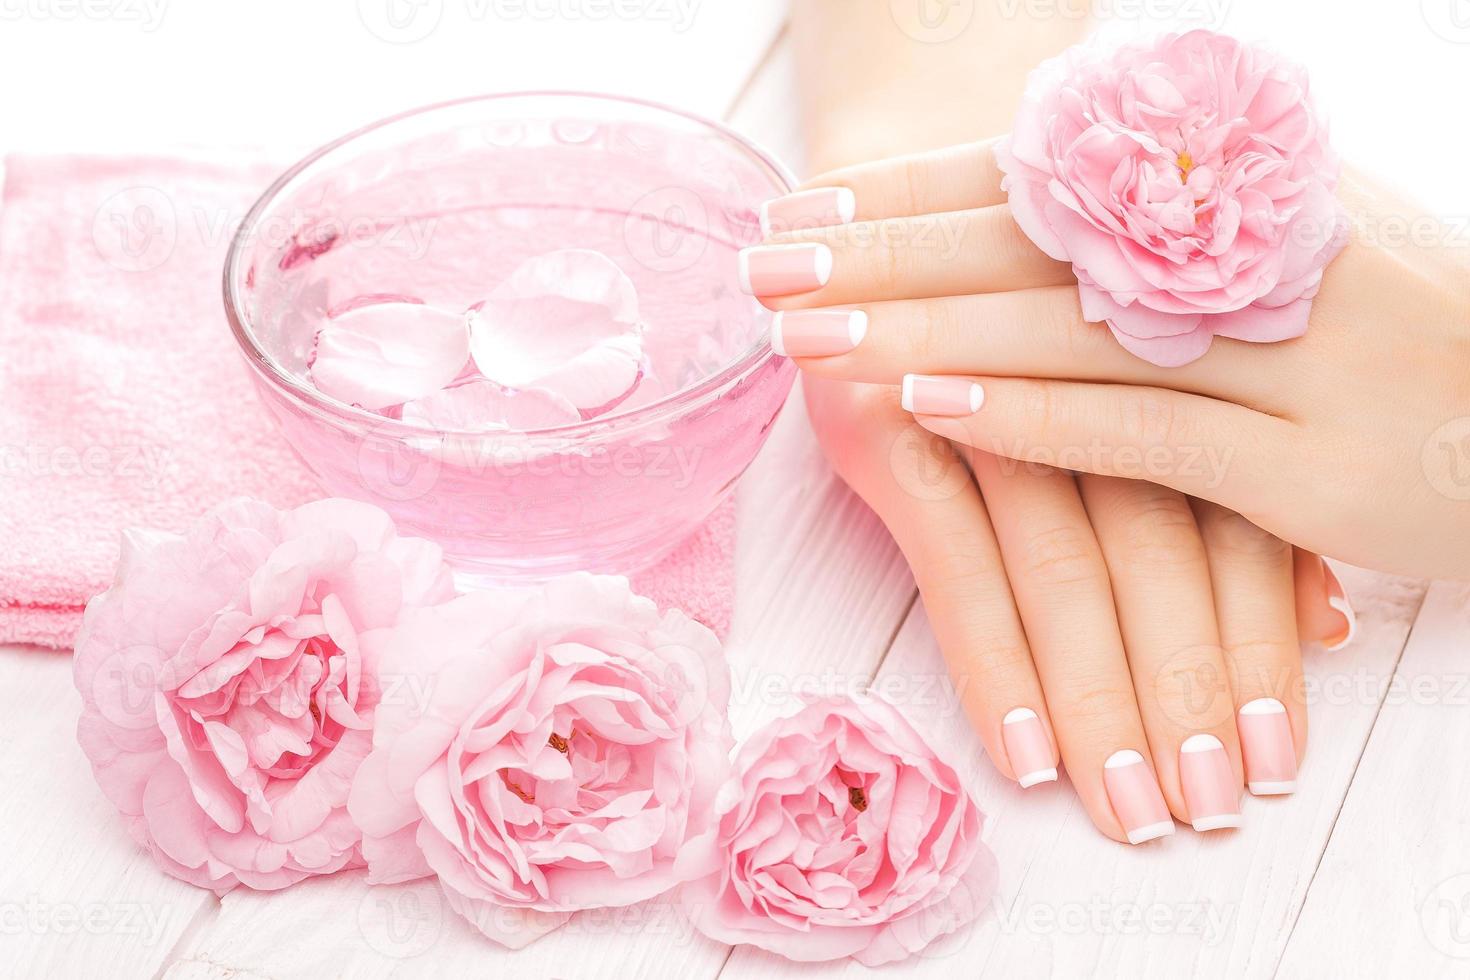 french manicure with rose flowers. spa photo